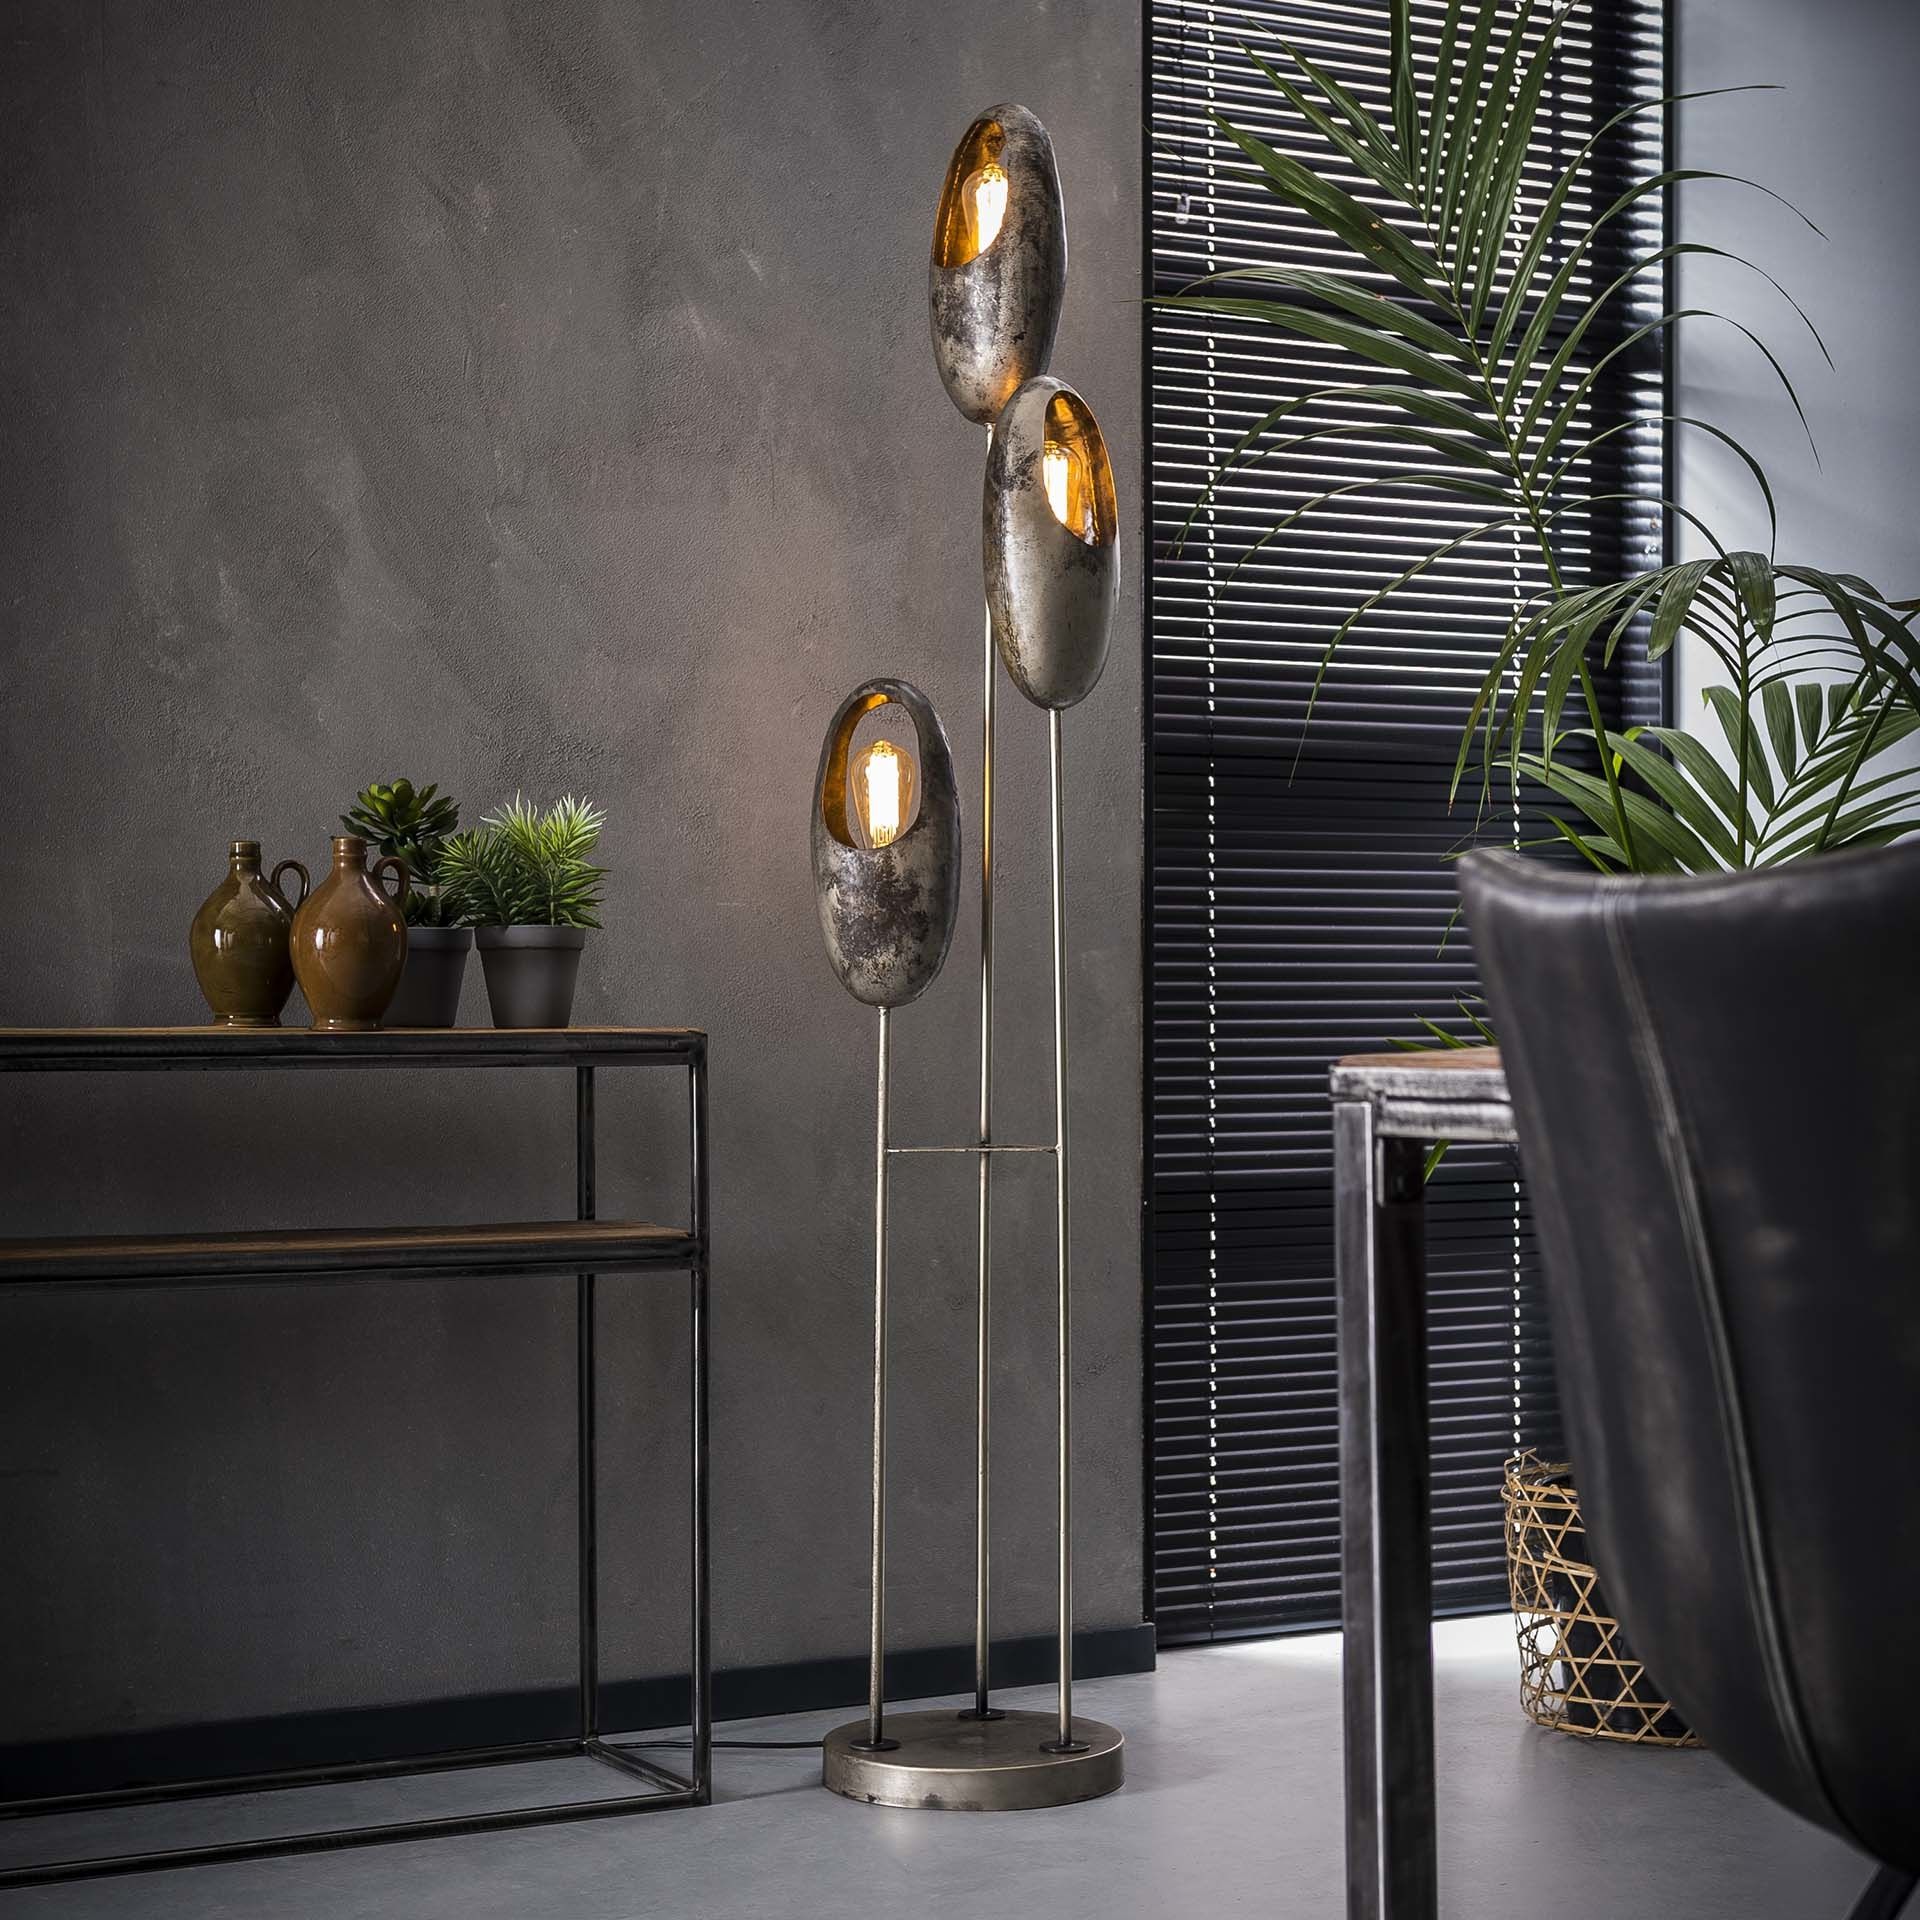 Modern Floor Lamp Stickney – Available At Furnwise! – Furnwise With Modern Floor Lamps (View 2 of 20)